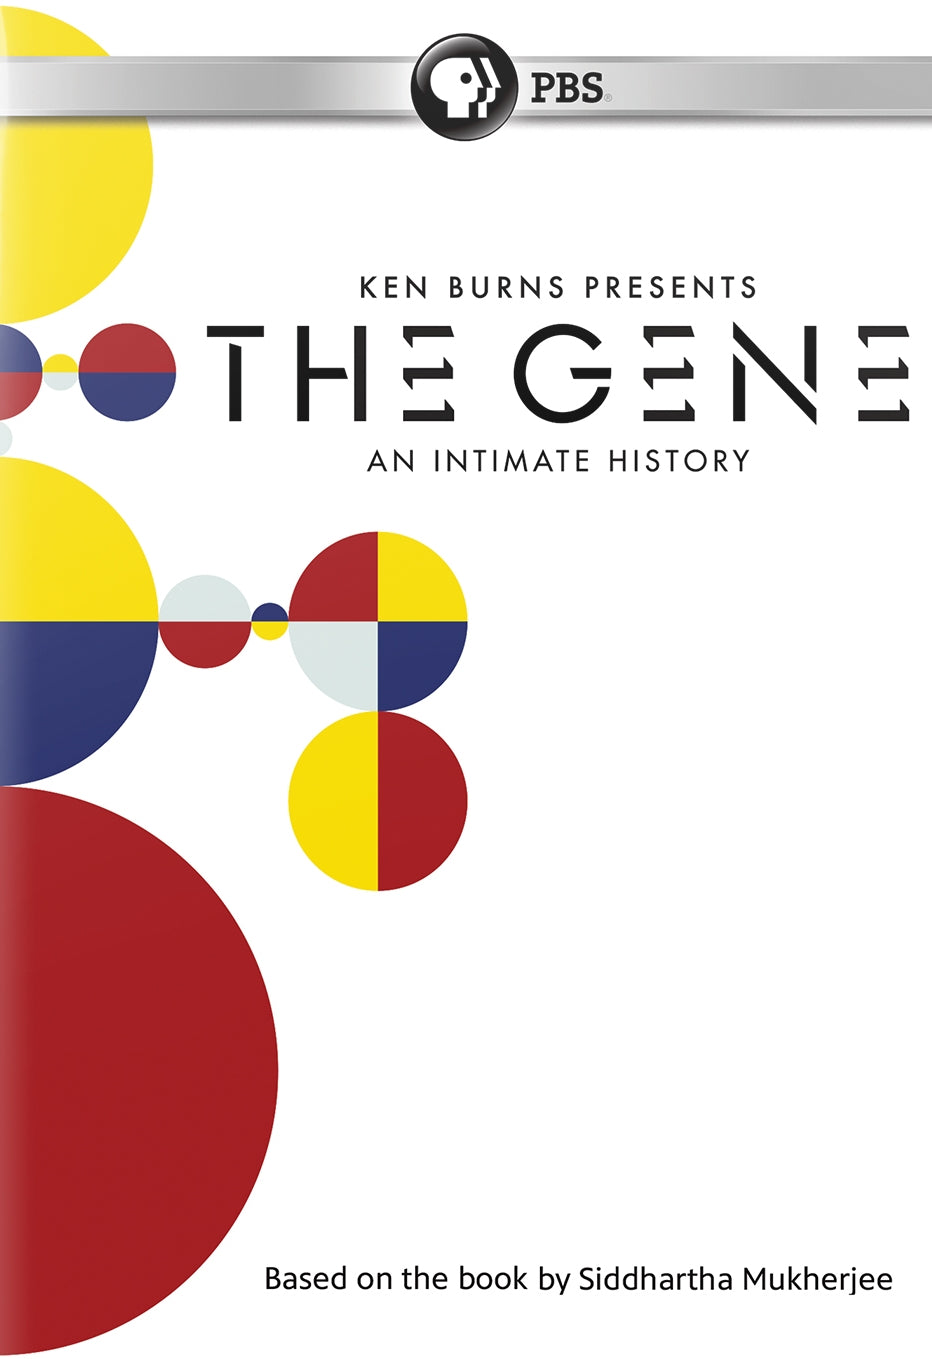 Ken Burns Presents: The Gene - An Intimate History cover art